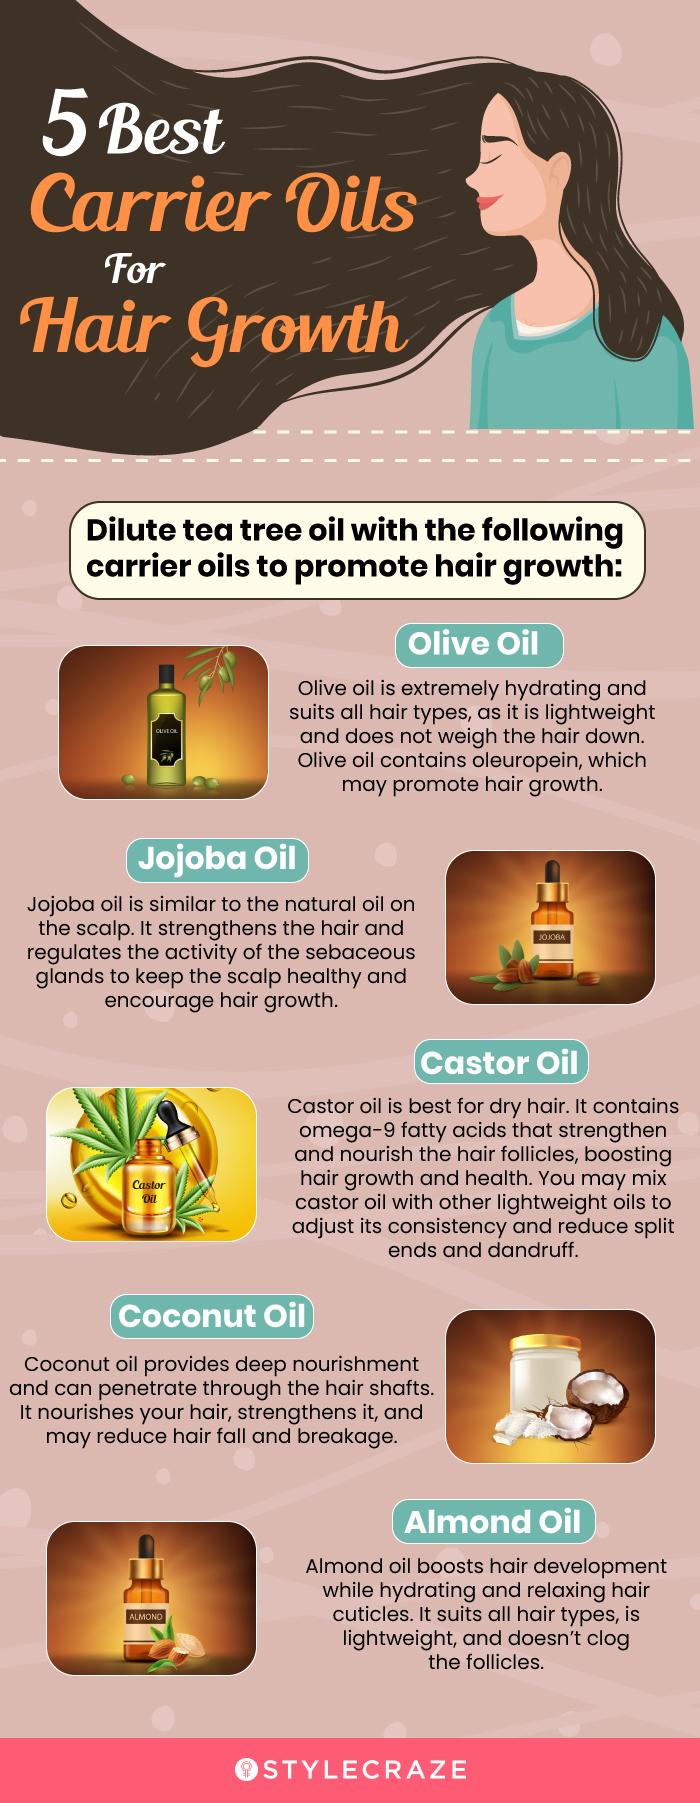 5 best carrier oils for hair growth [infographic]